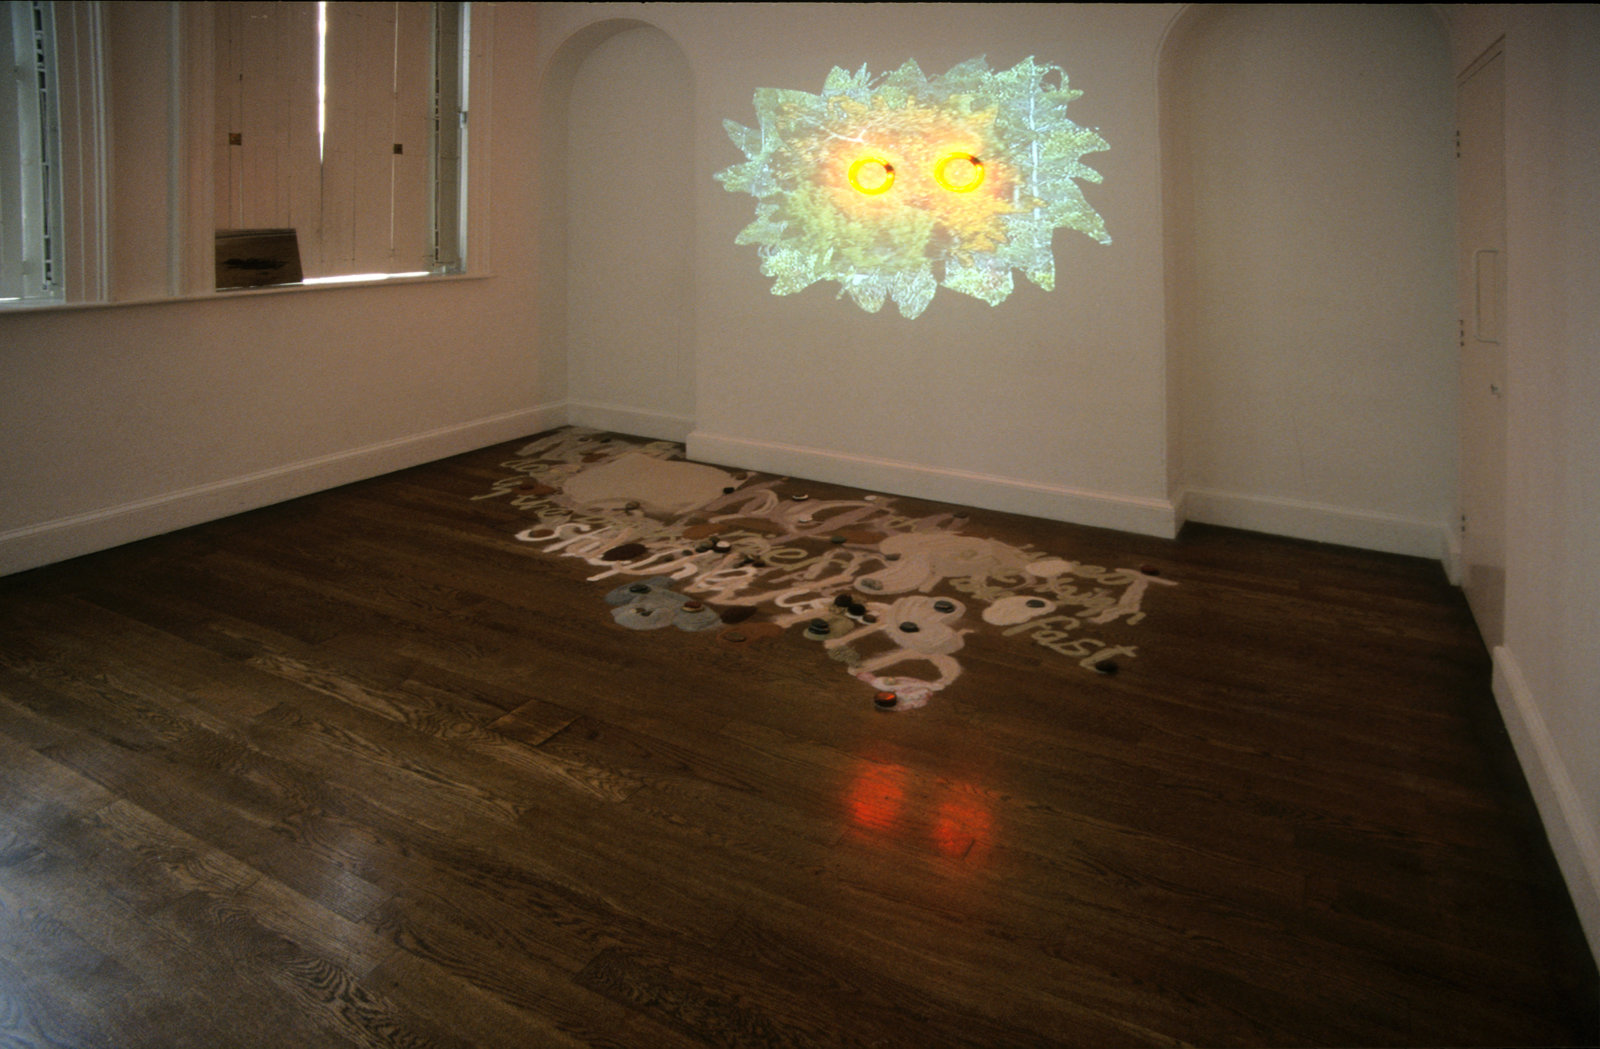 Christina Mackie, An Interzone/intertidalzone, 2002–2012, Nightlight, DVD, filmed by Quentin Mackie, sand, pigments, beach stones polished by Gillian Mackie, inkjet print, fir, steel cloth, plastic, ceramics (George and Christina Mackie), Forestface, DVD projection, fluorescent lamps, dimensions variable. Installation view, The Interzone, Henry Moore Institute, Leeds, UK, 2002